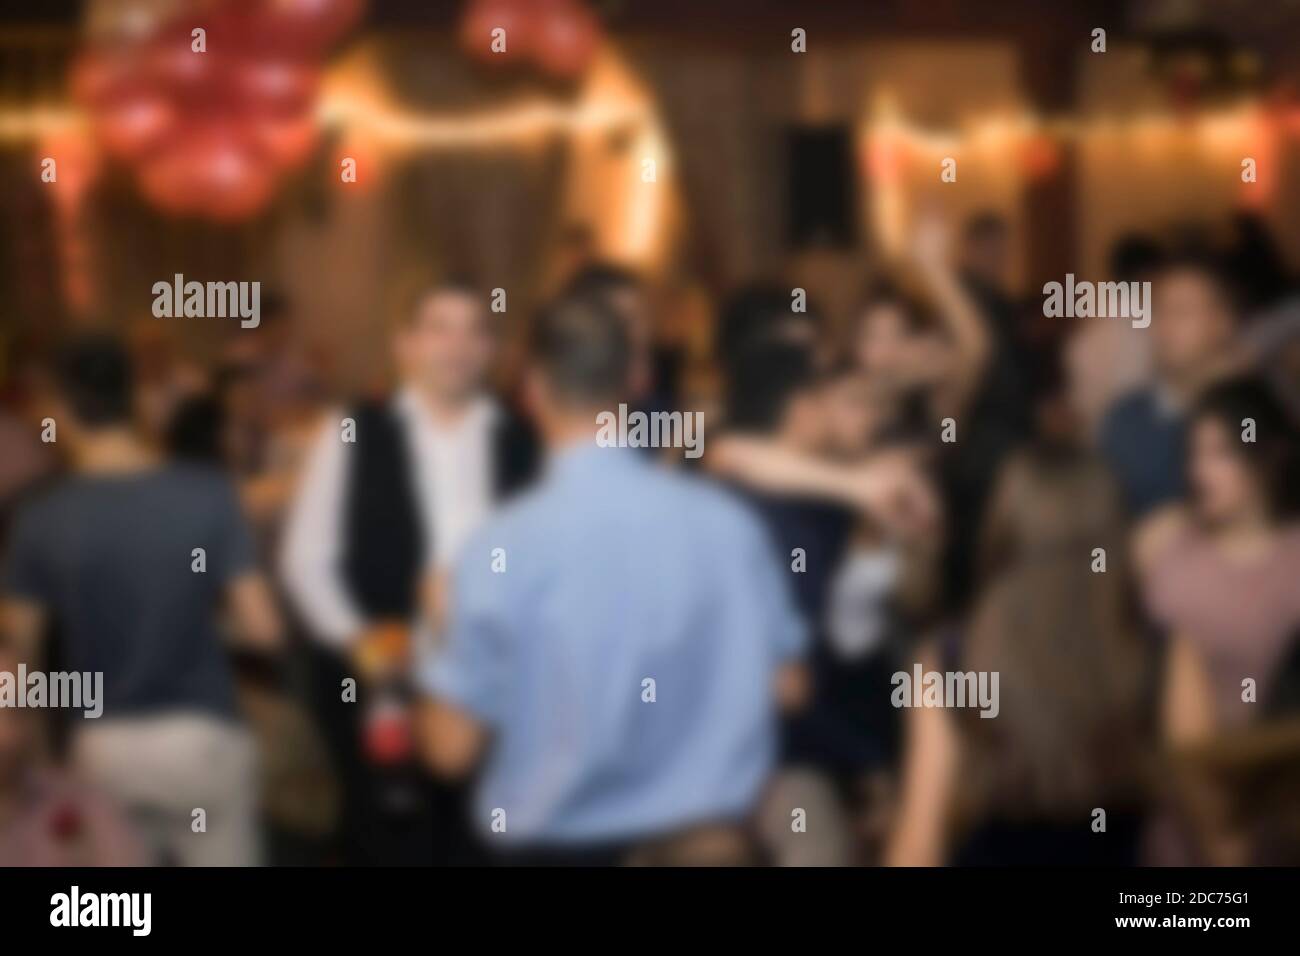 Birthday party, night out or New Year celebration. Blurred image for background use. Stock Photo